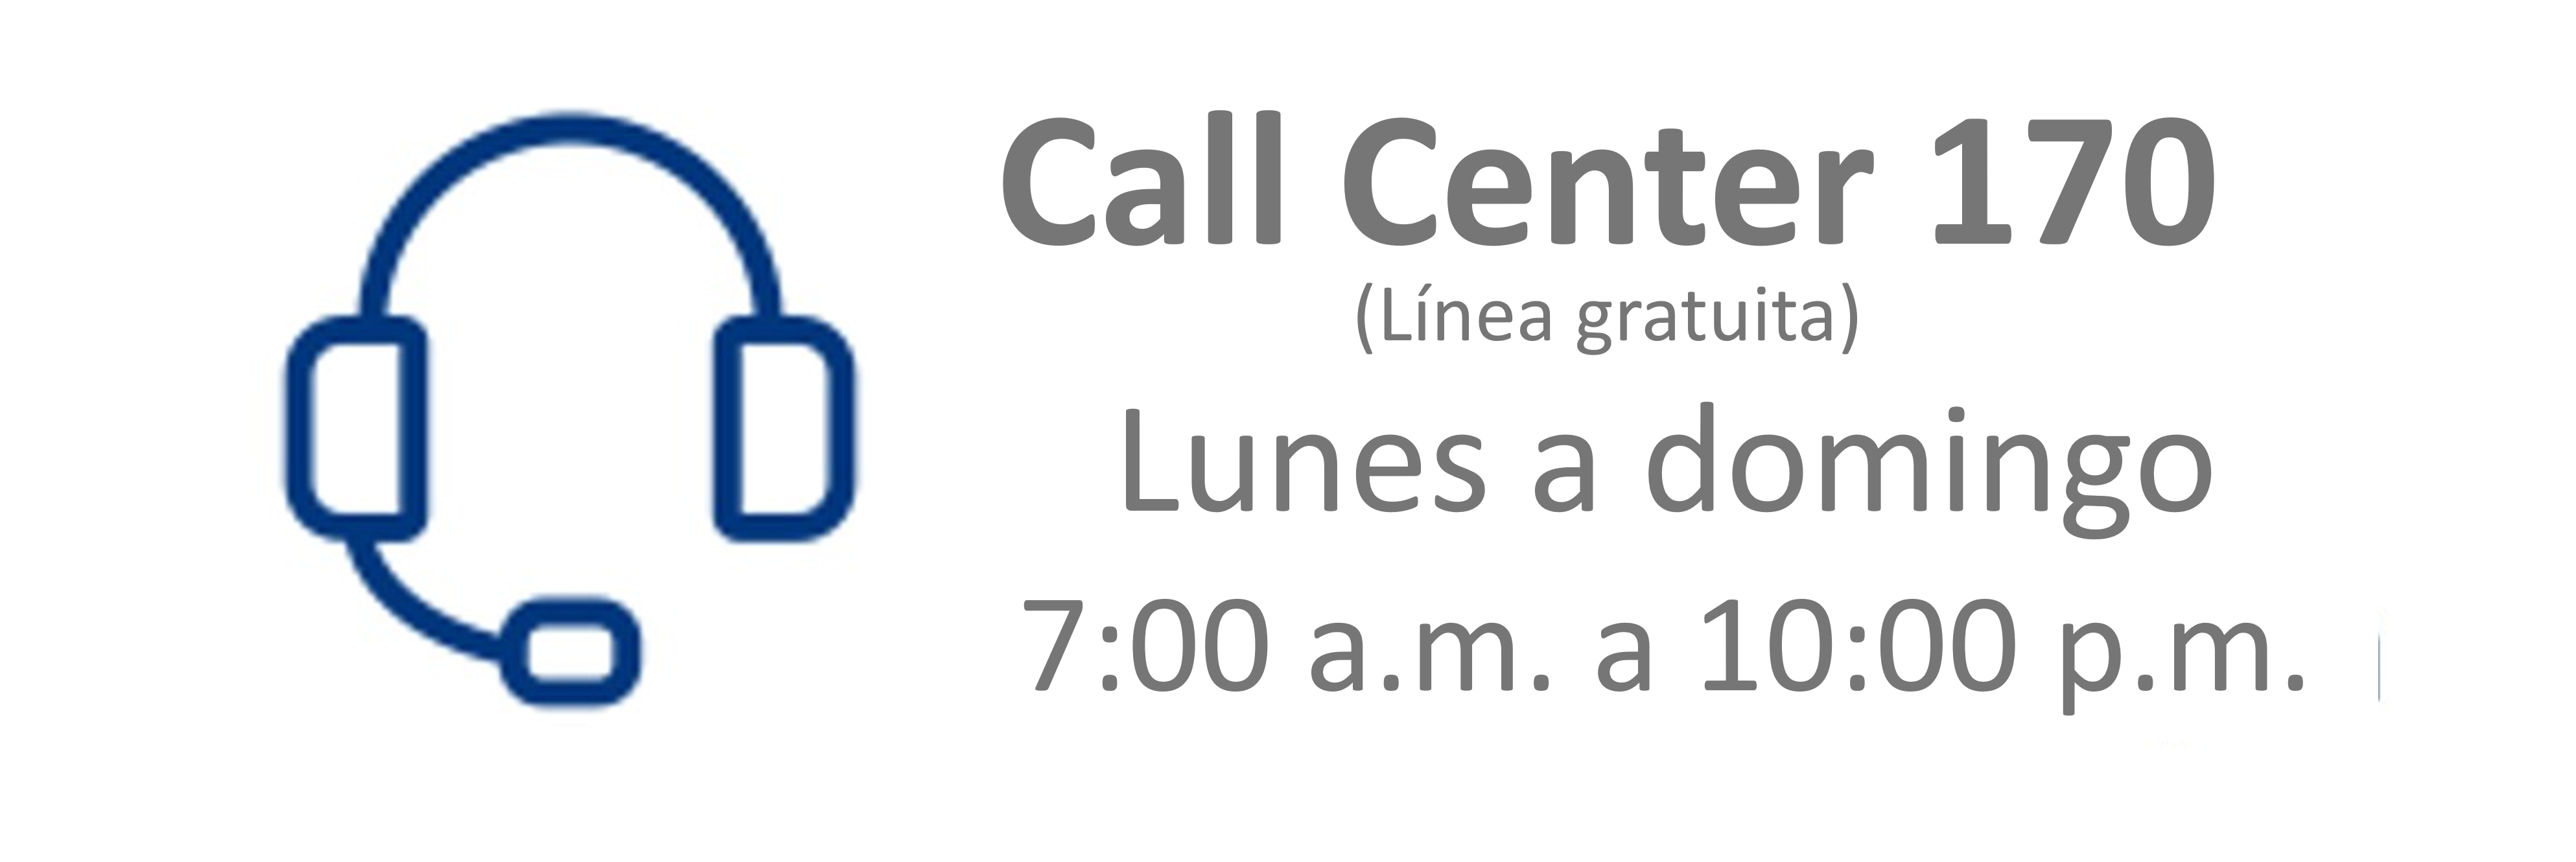 call-center-170.png